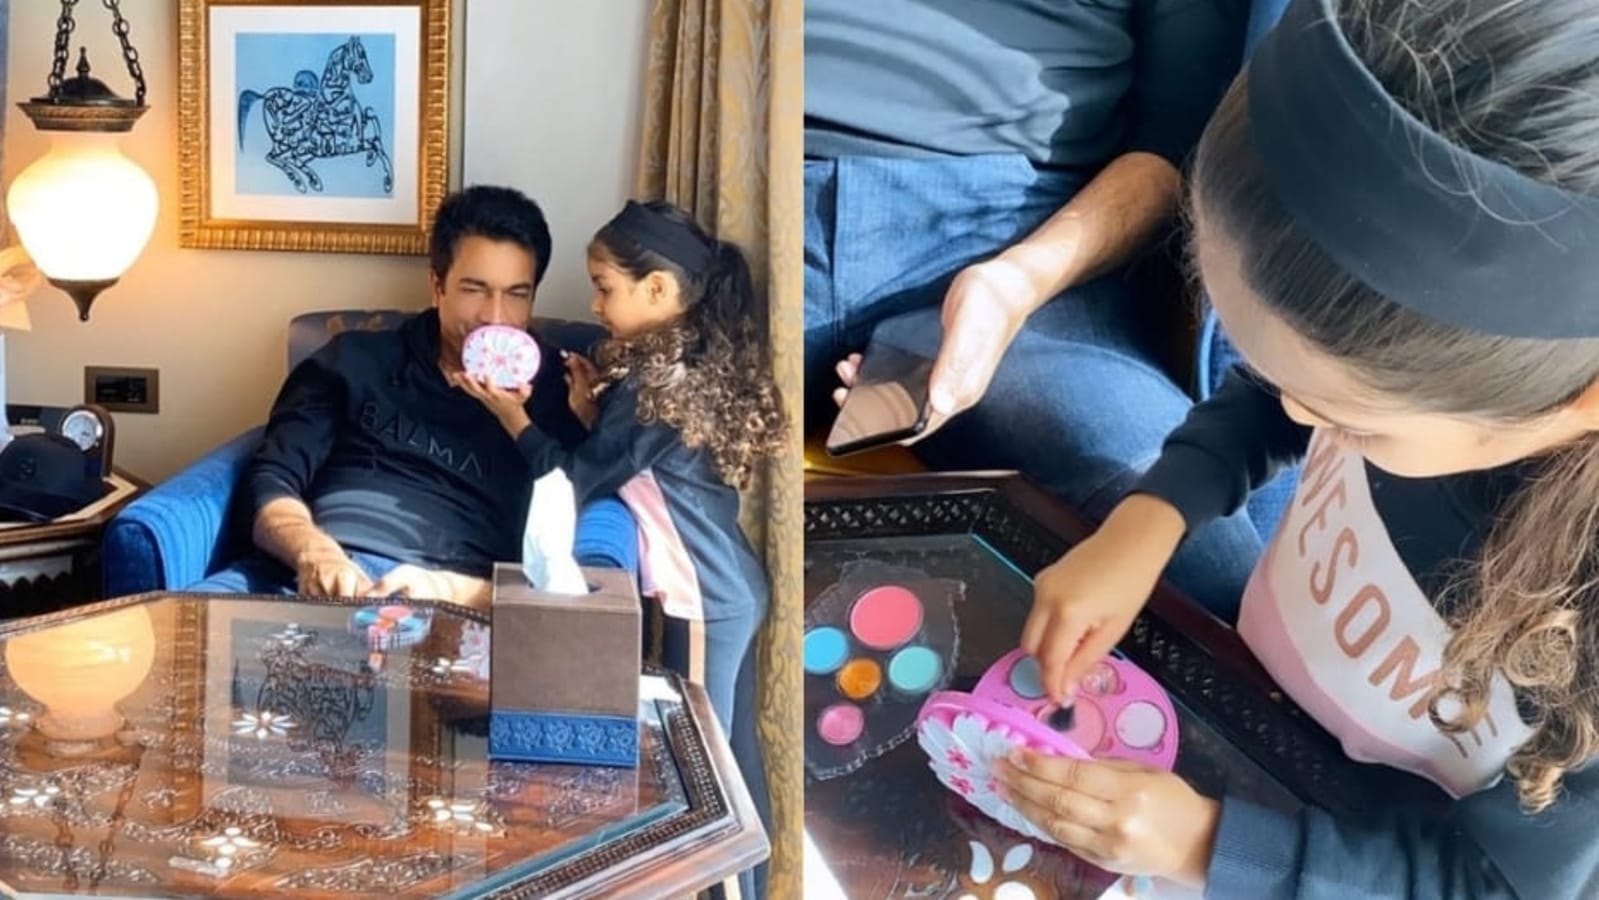 Asin shares pics of daughter Arin putting makeup on her ‘reluctant’ dad Rahul Sharma: ‘Pout please’